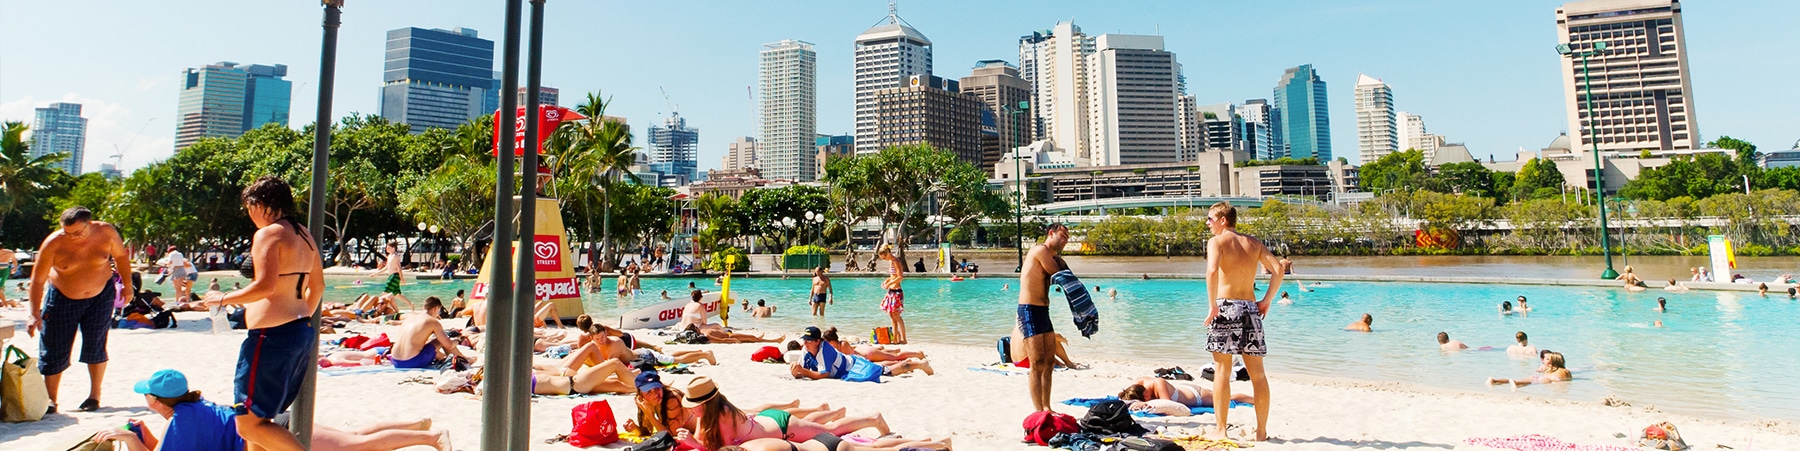 Local's guide: Brisbane's South Bank